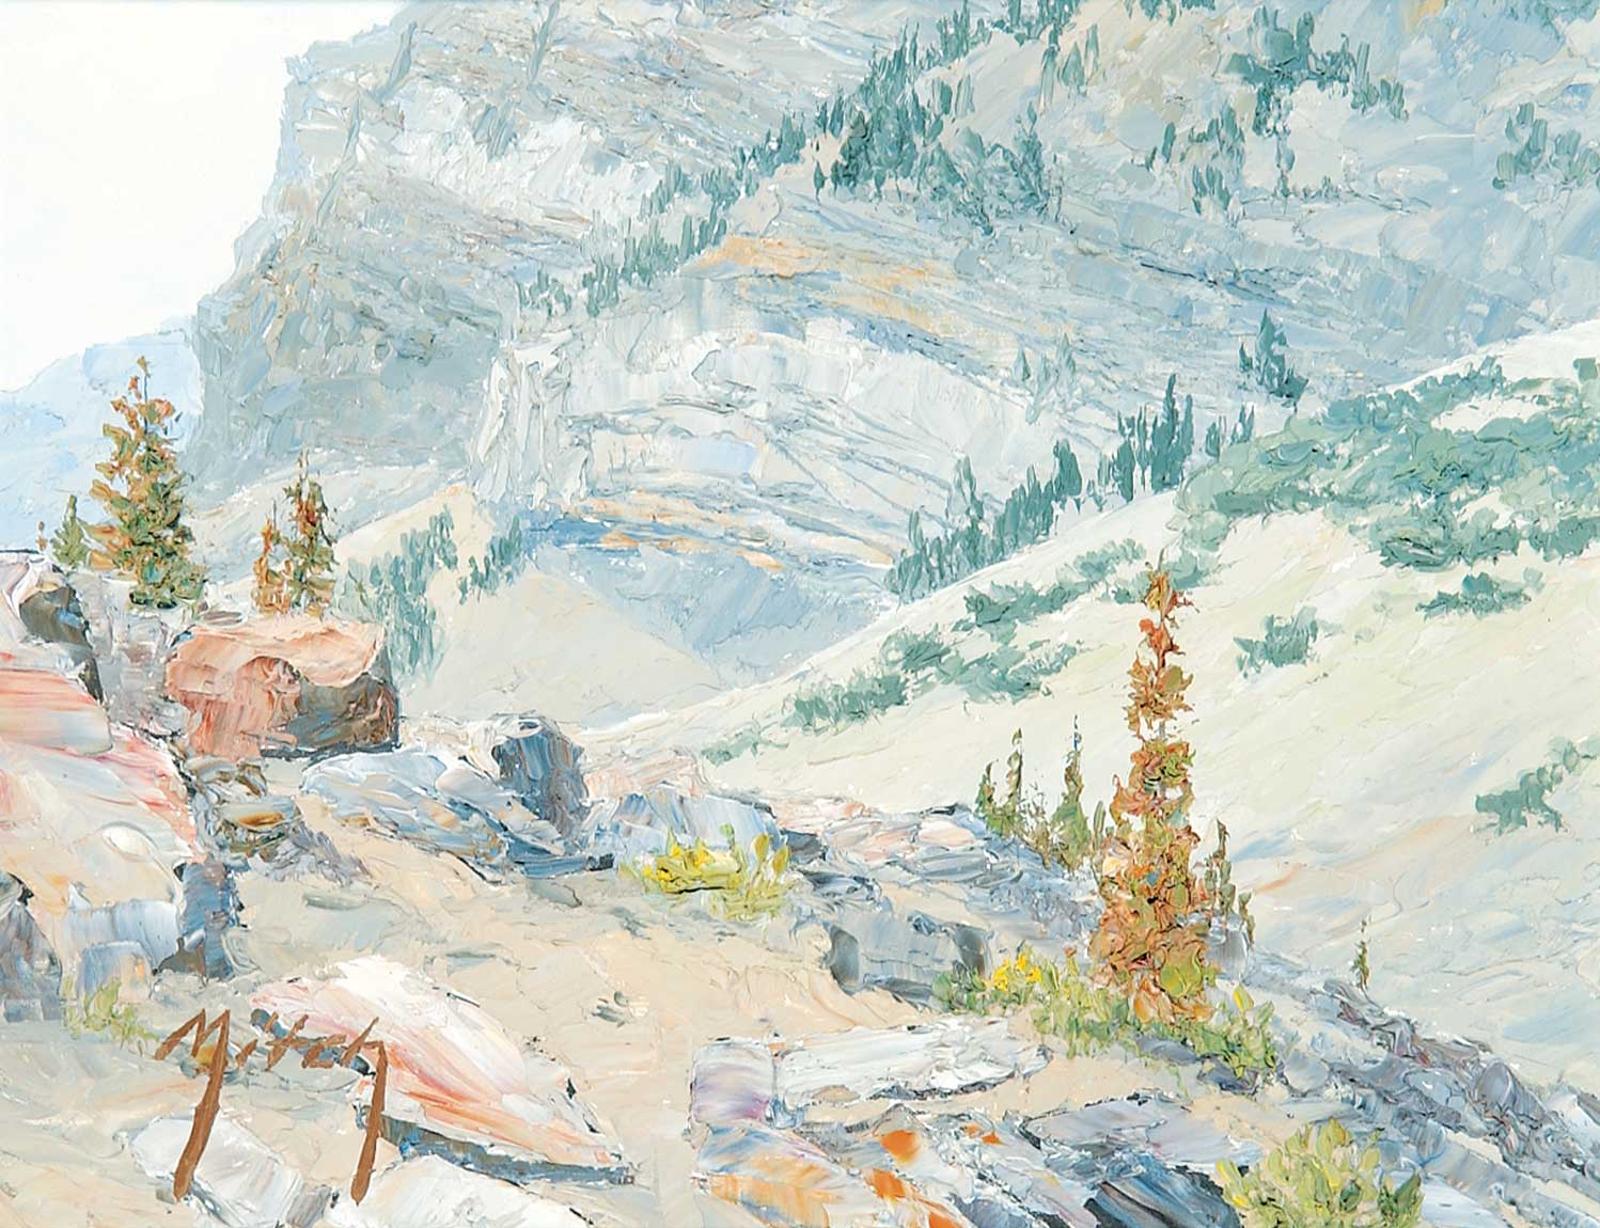 Mitch Keirstead (1948) - Afternoon Glow by Moraine Lake [Valley of the Ten Peaks]